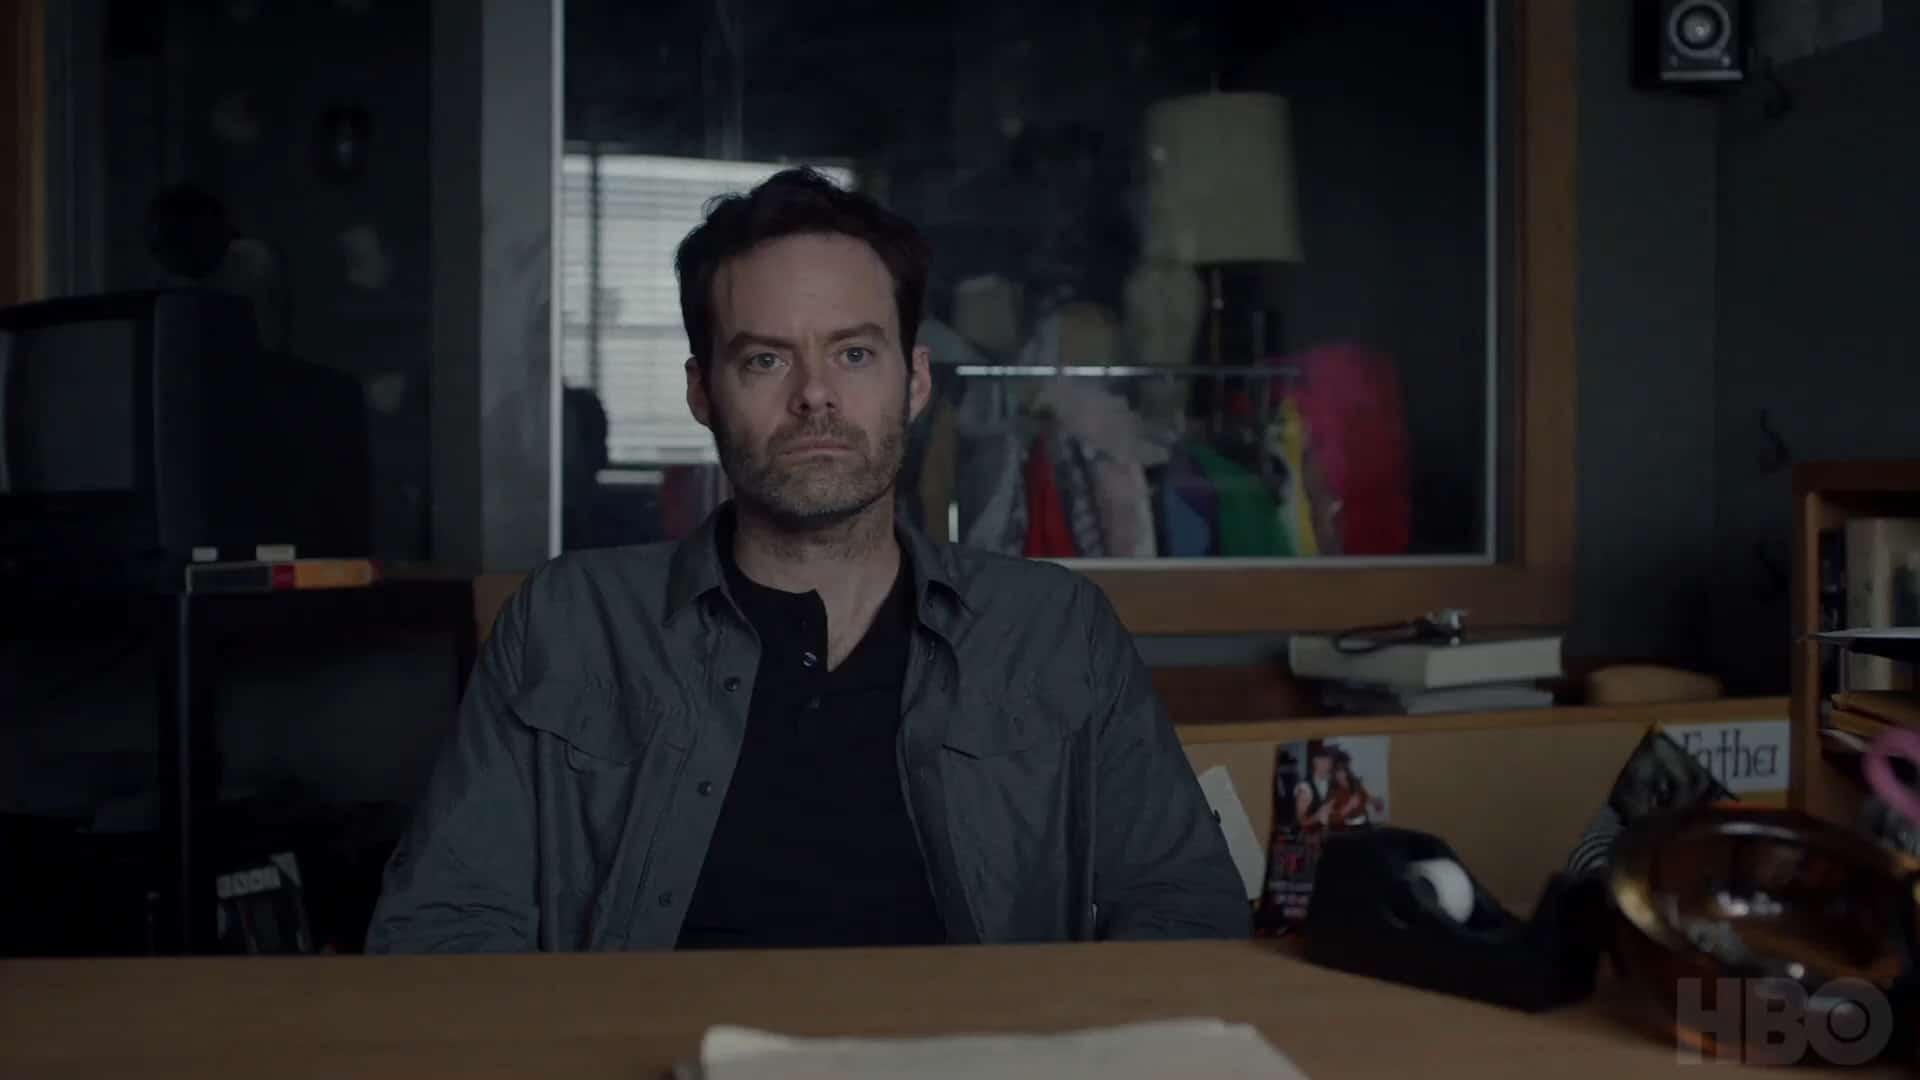 Bill Hader as Barry in the show, Barry